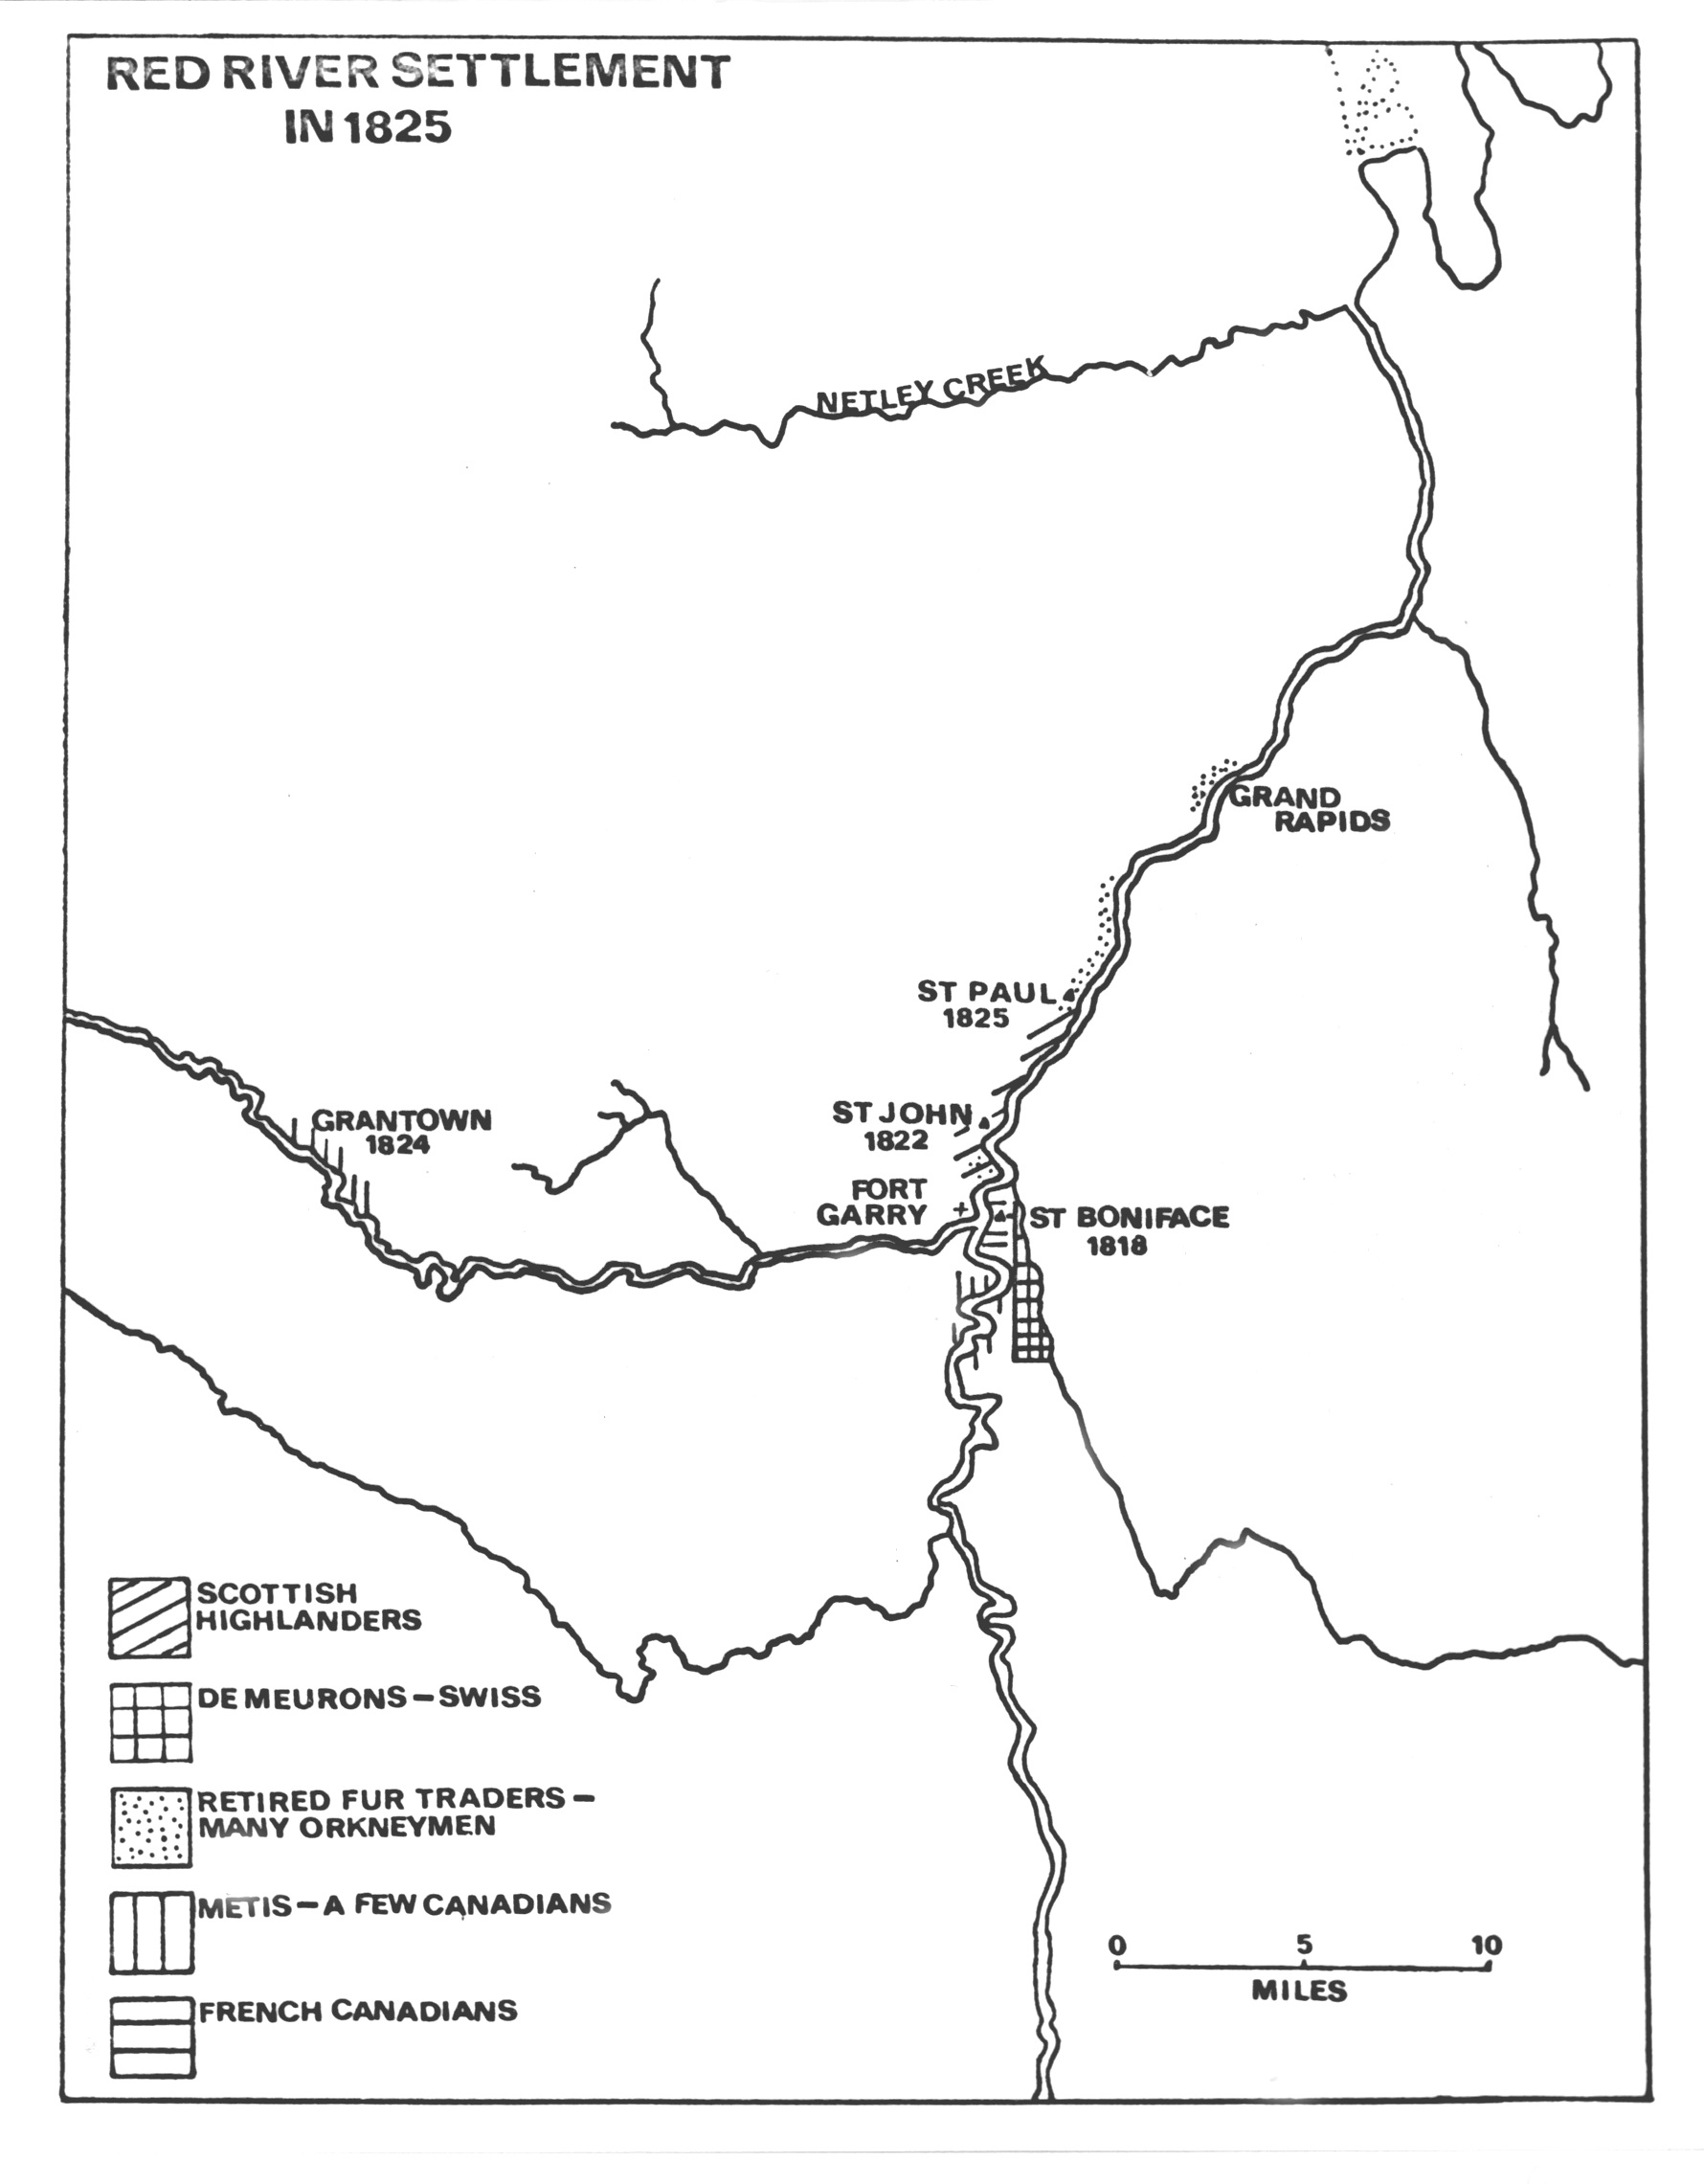 Map of Red River Settlement in 1825